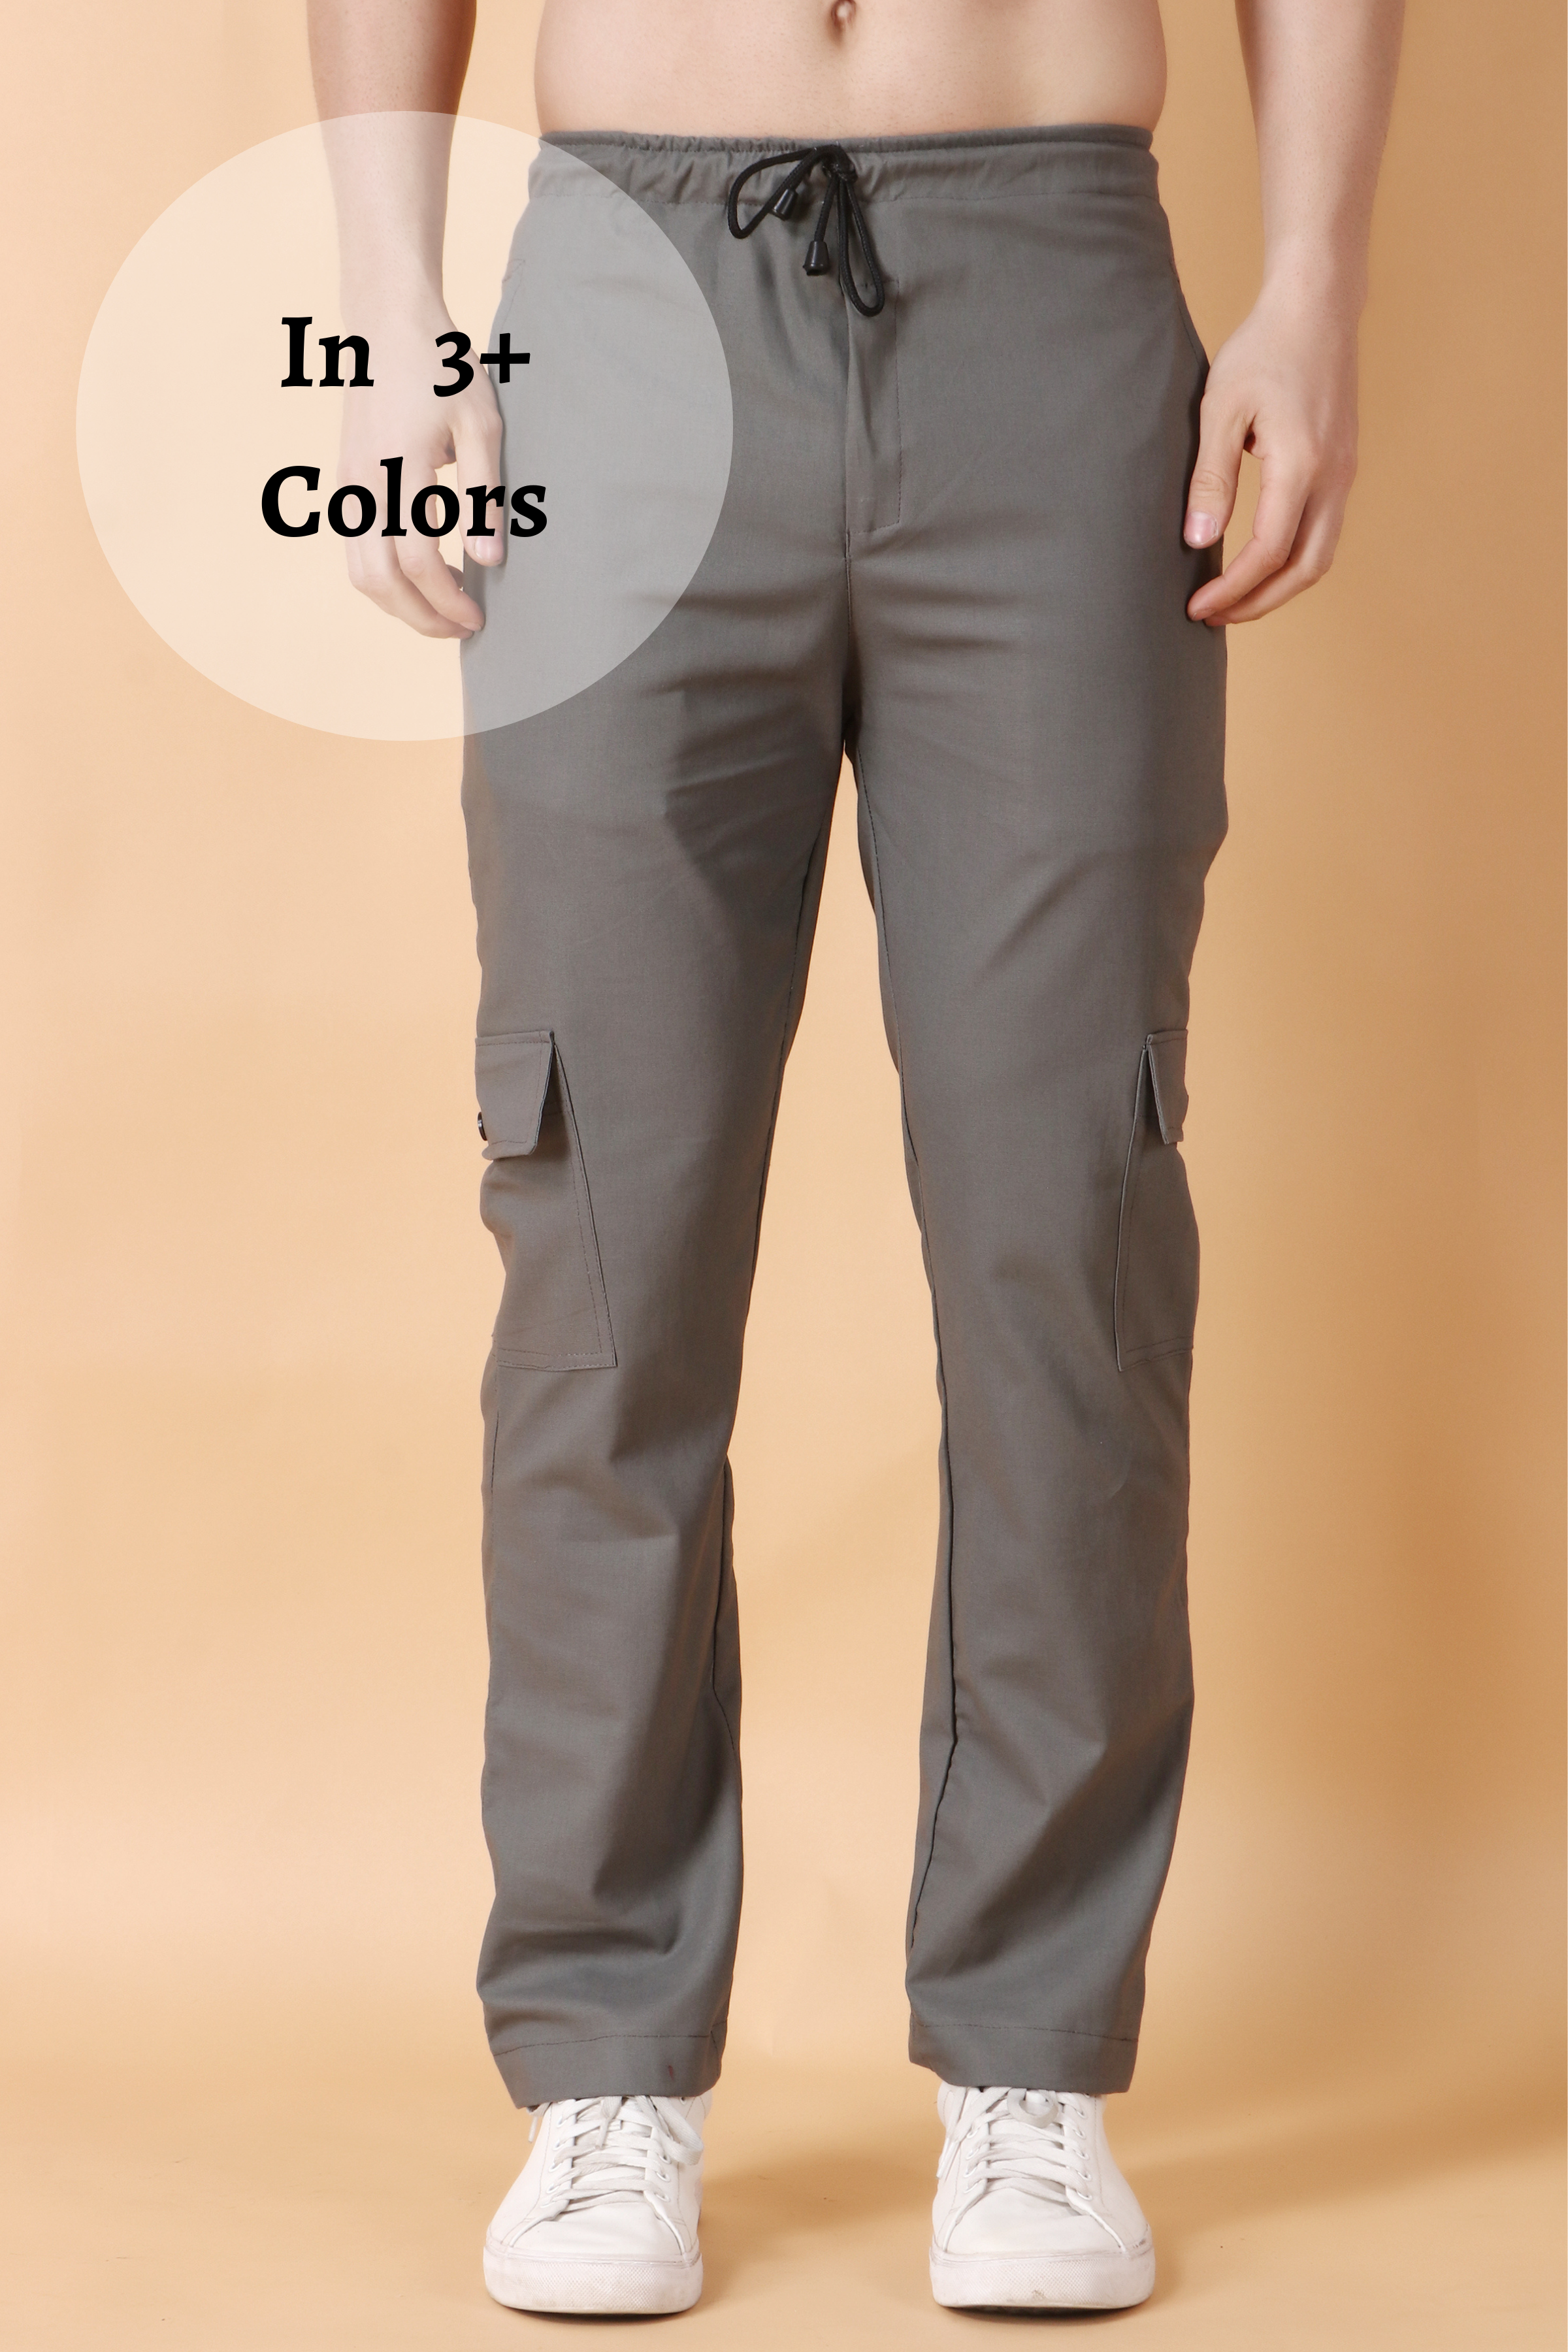 Spring Flared Mens Formal Sheer Pants With Bell Bottom White Dance Suit In  Sizes 28 37 230608 From Bian01, $41.19 | DHgate.Com